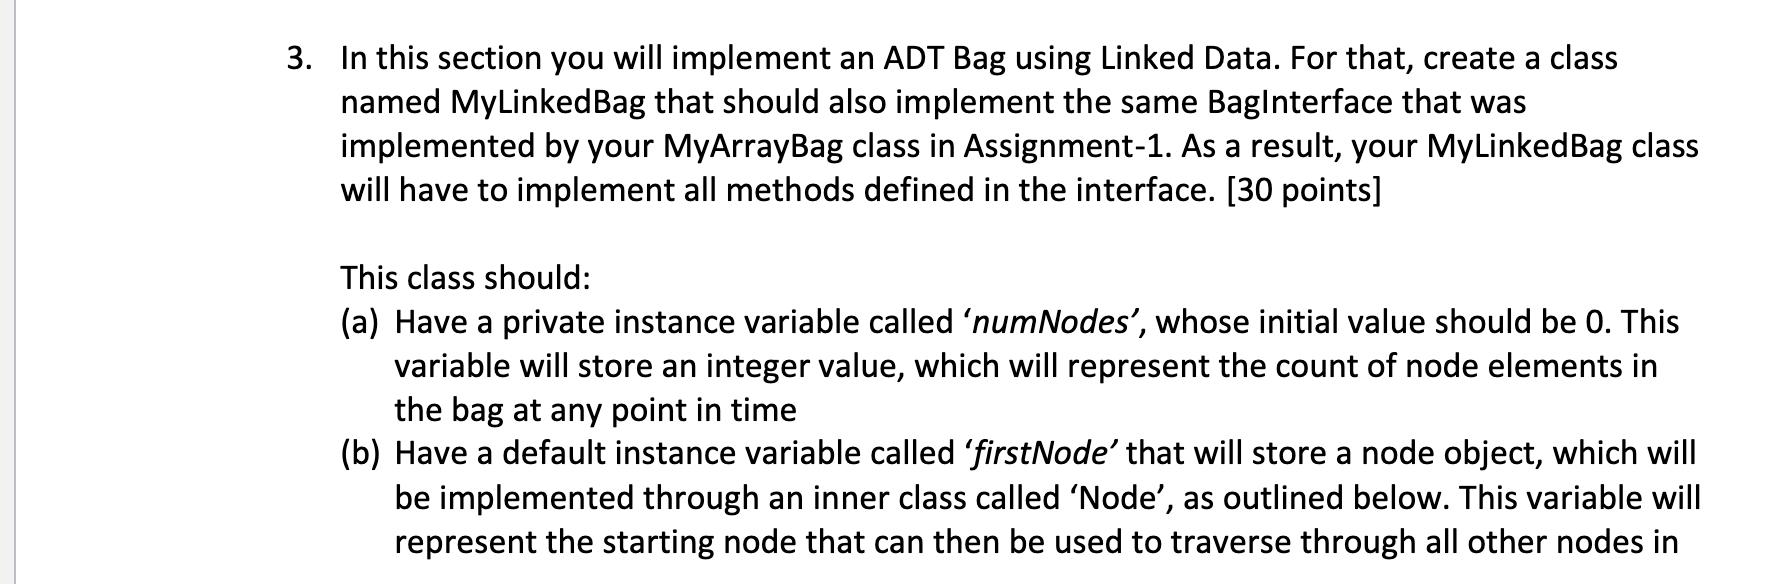 3. In this section you will implement an ADT Bag using Linked Data. For that, create a class named